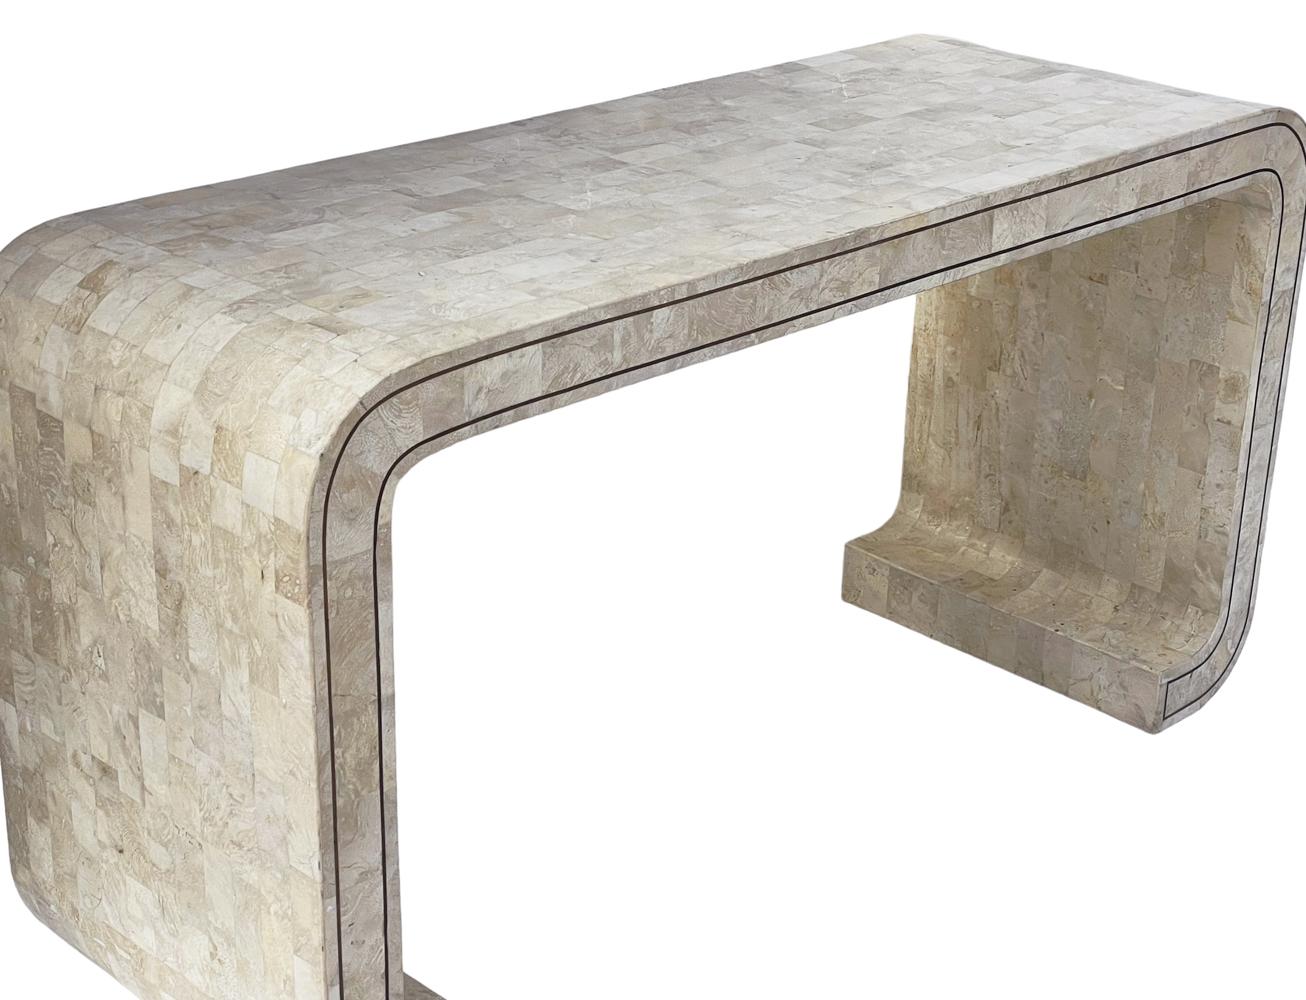 Late 20th Century Hollywood Regency Beige Tessellated Marble Stone Waterfall Console or Sofa Table For Sale